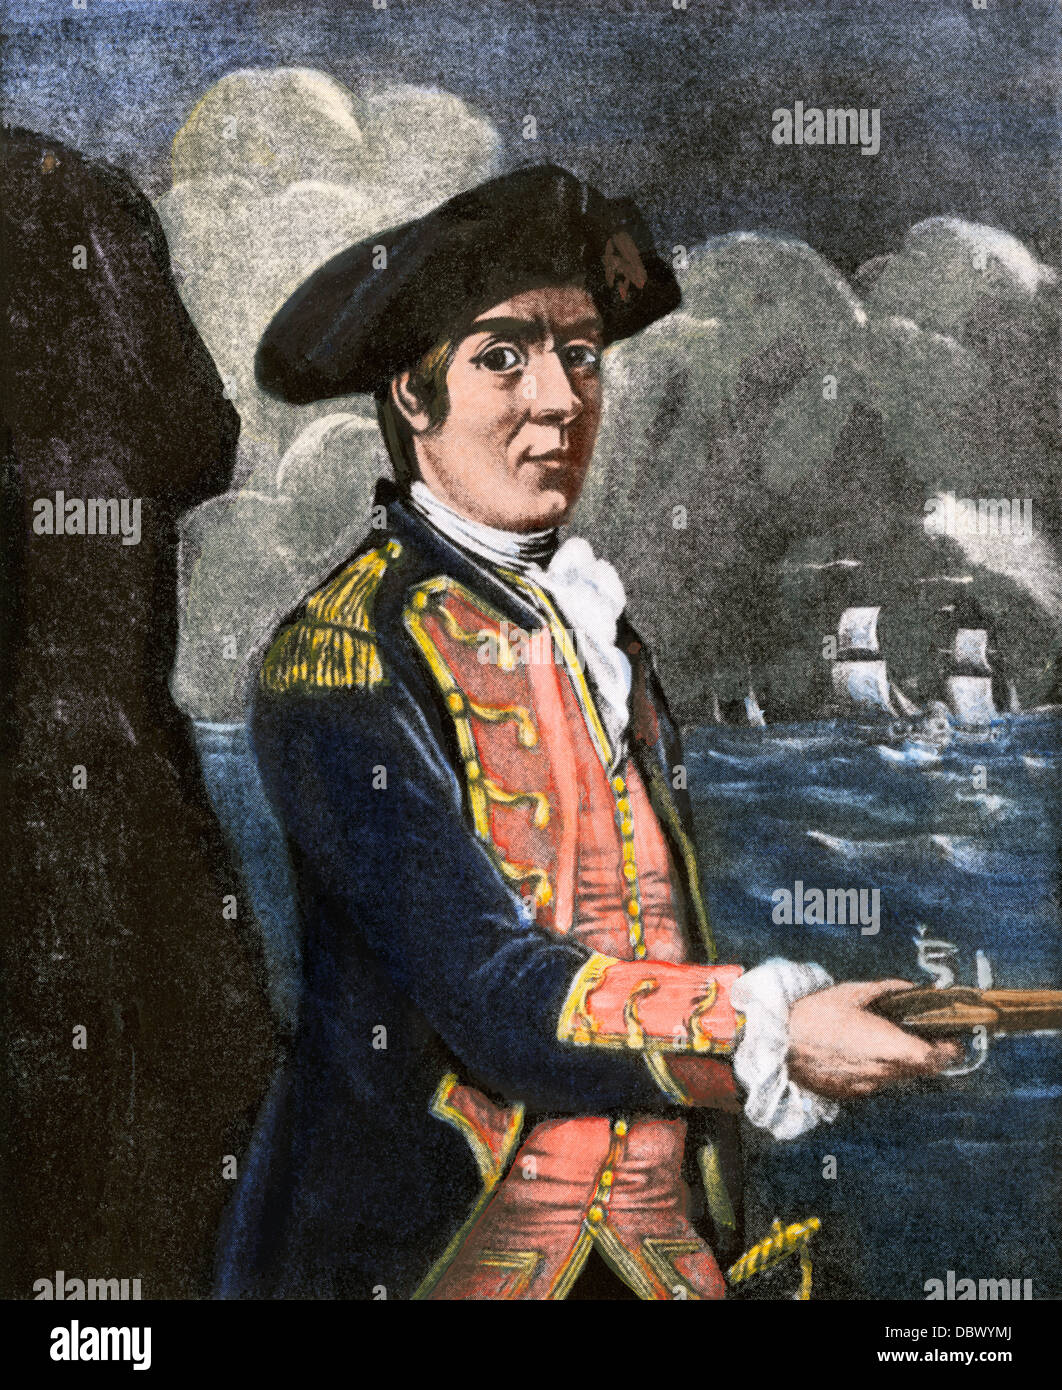 Captain John Paul Jones in a sea battle during the American Revolution. Hand-colored halftone reproduction of an illustration Stock Photo